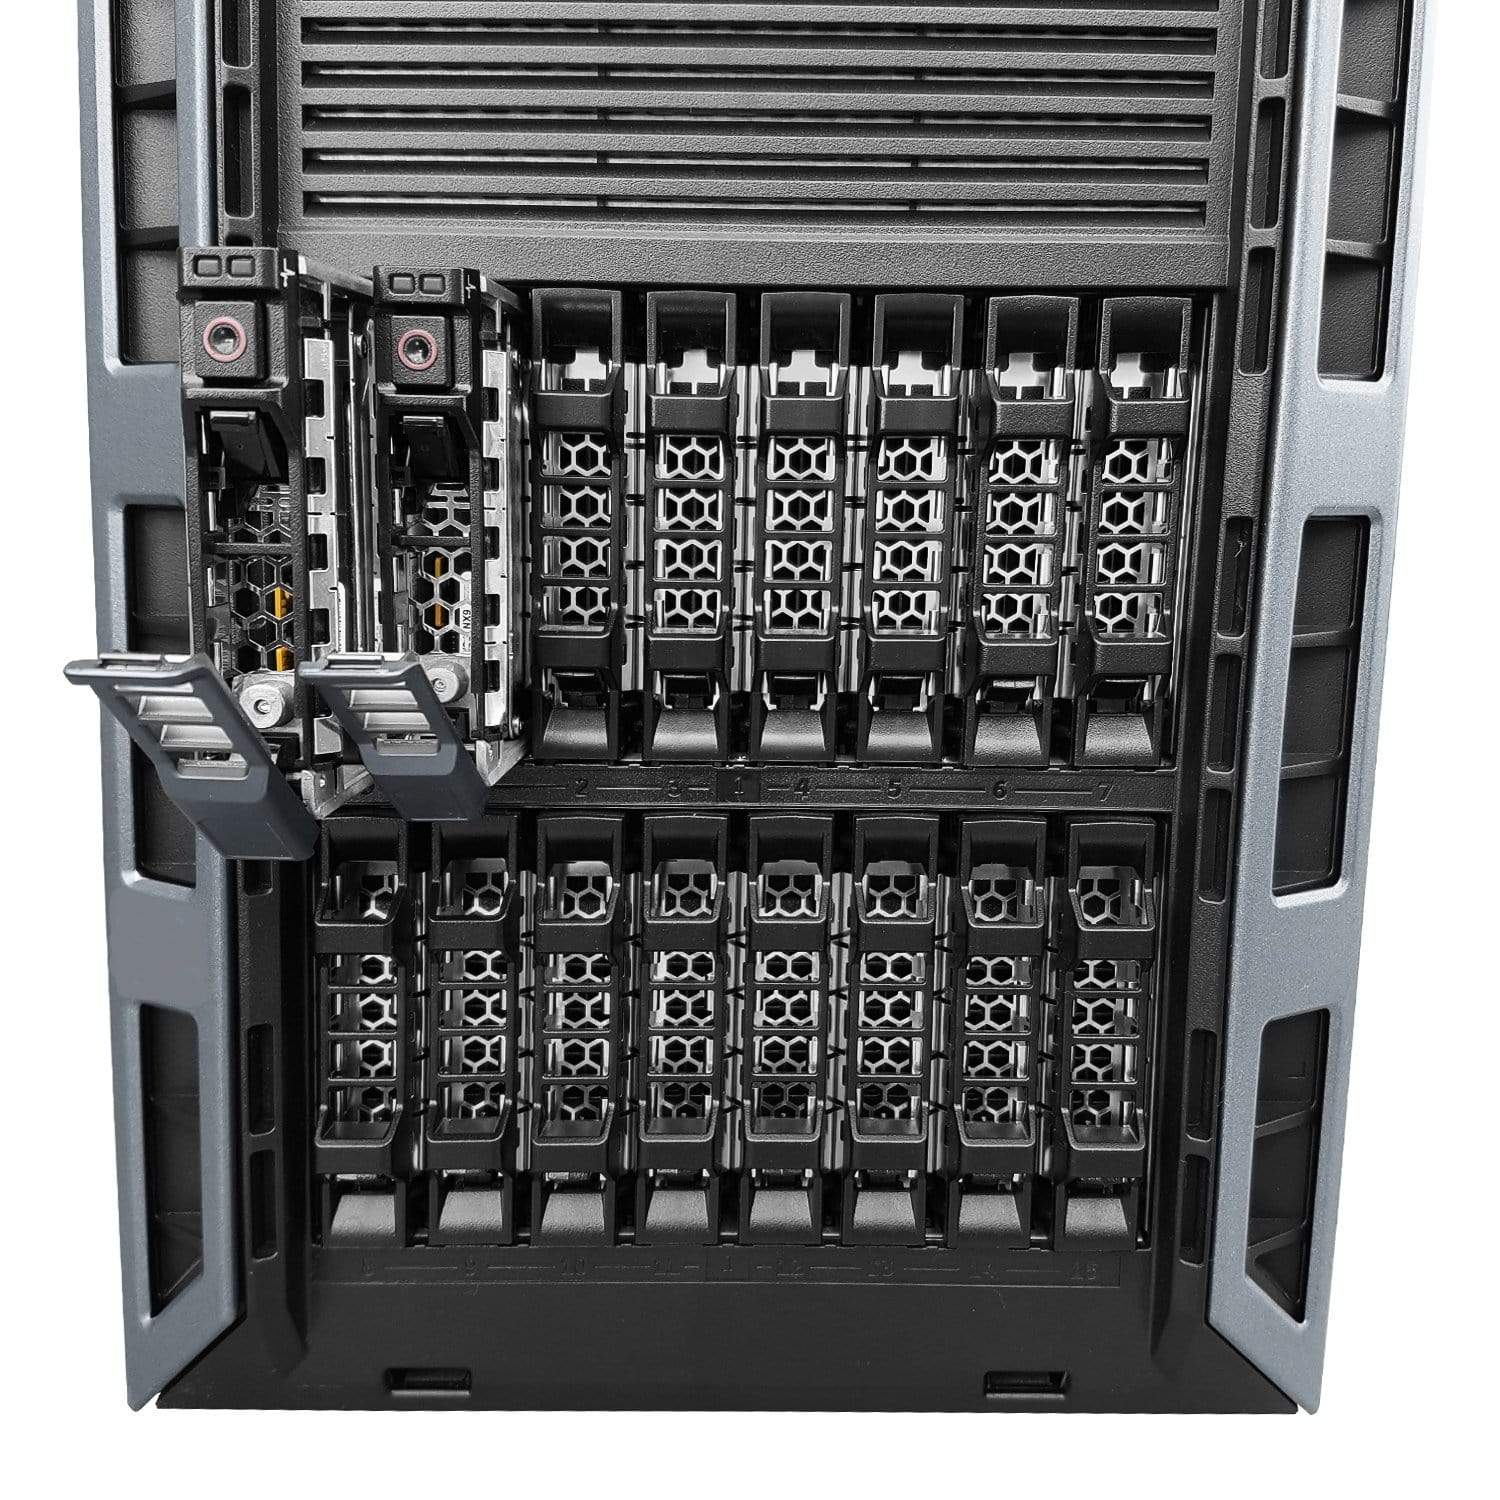 WORKDONE 4-Pack 8FKXC Compatibile 2.5 pollici Caddy per Dell PowerEdge  Servers